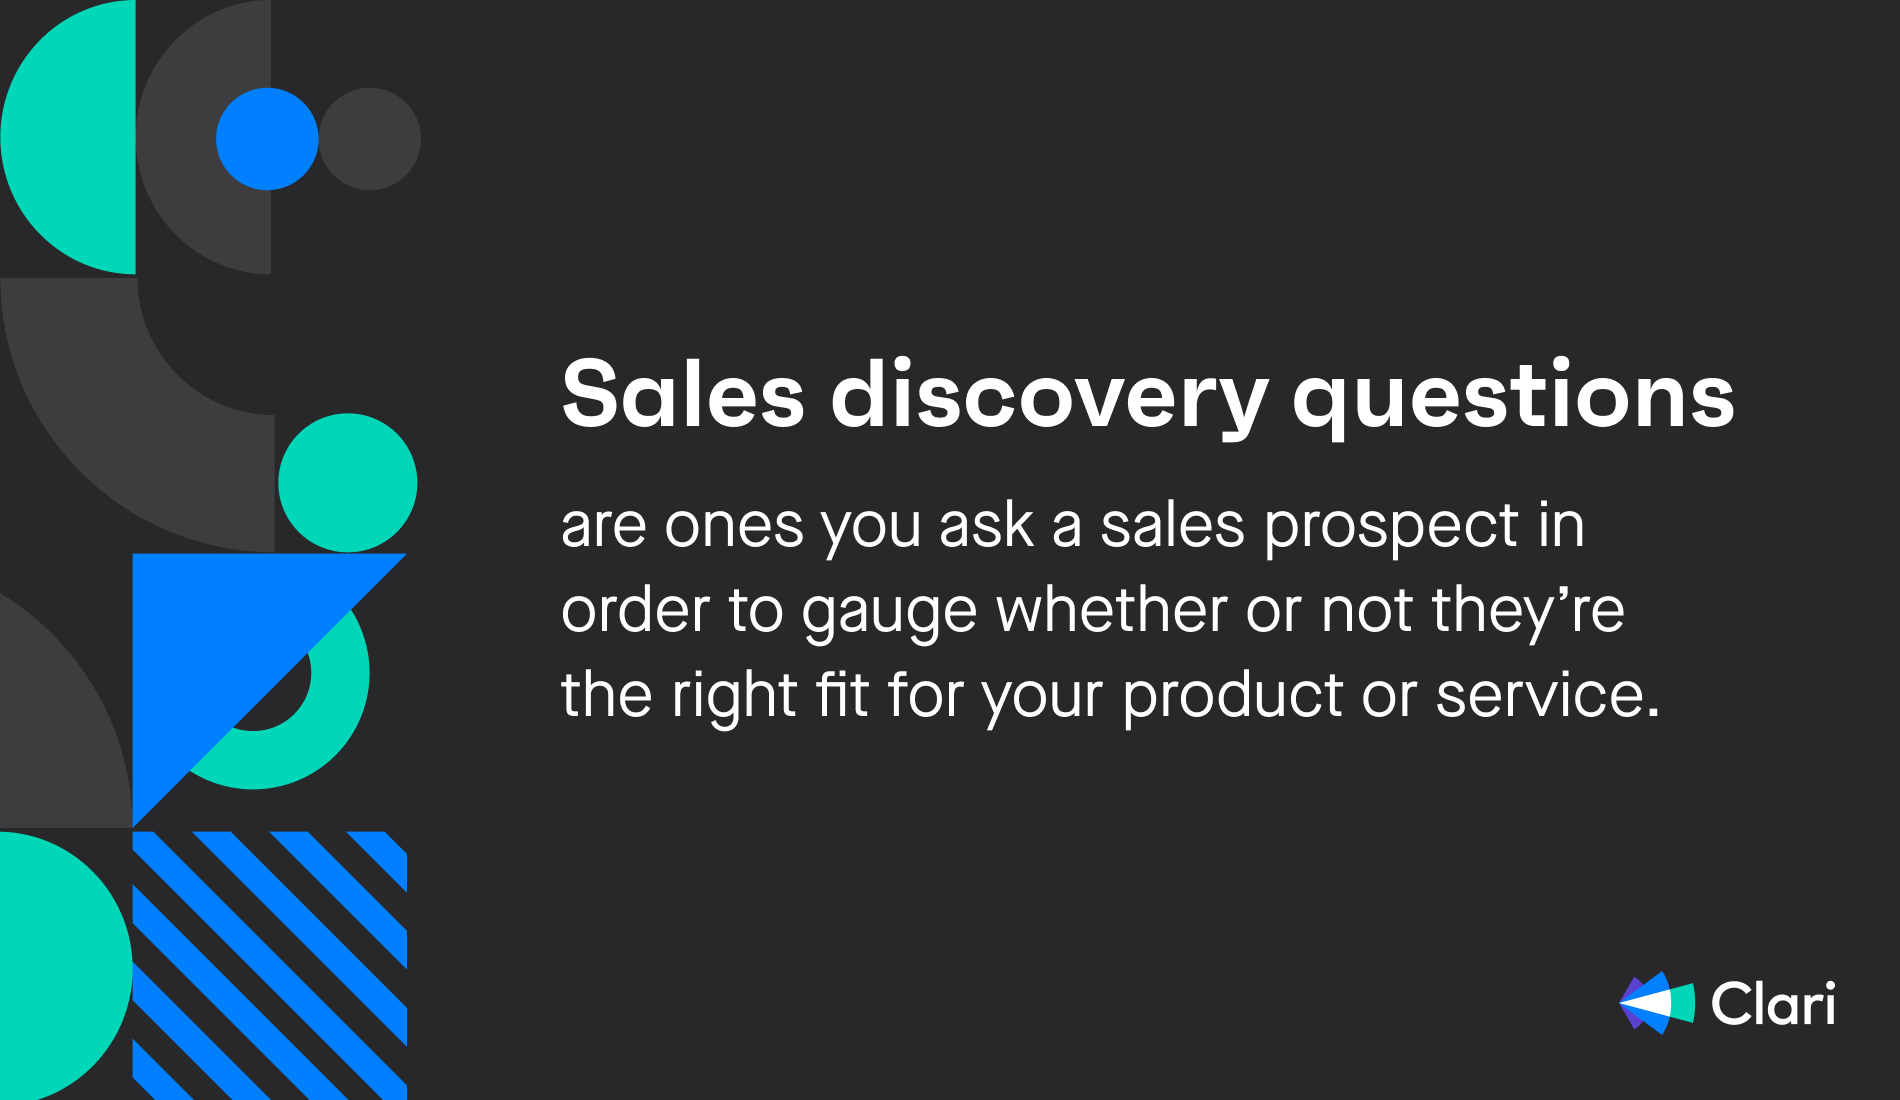 What is a sales discovery question?